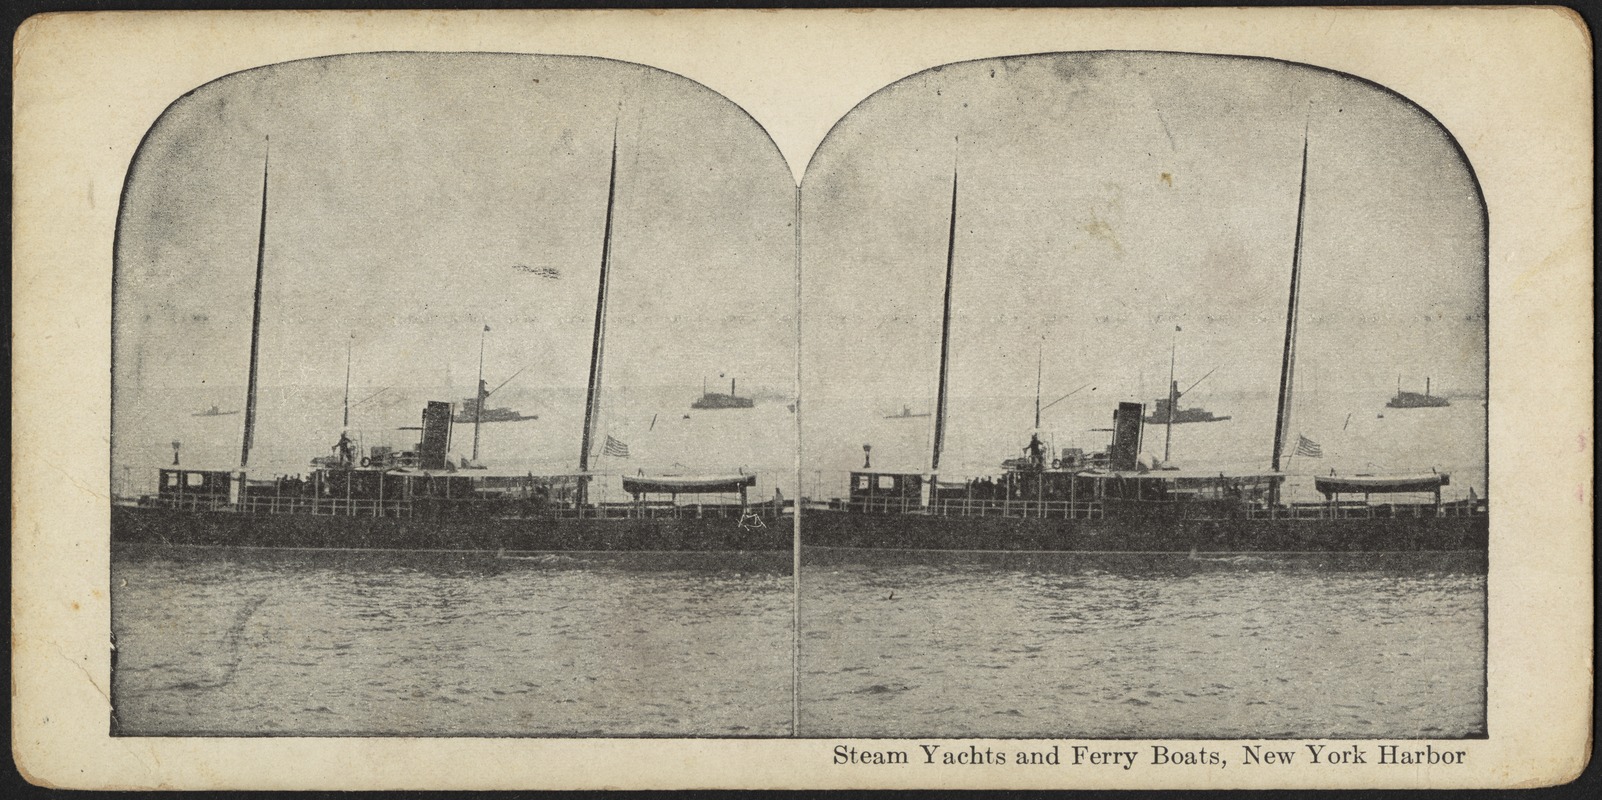 Steam yachts and ferry boats, New York Harbor